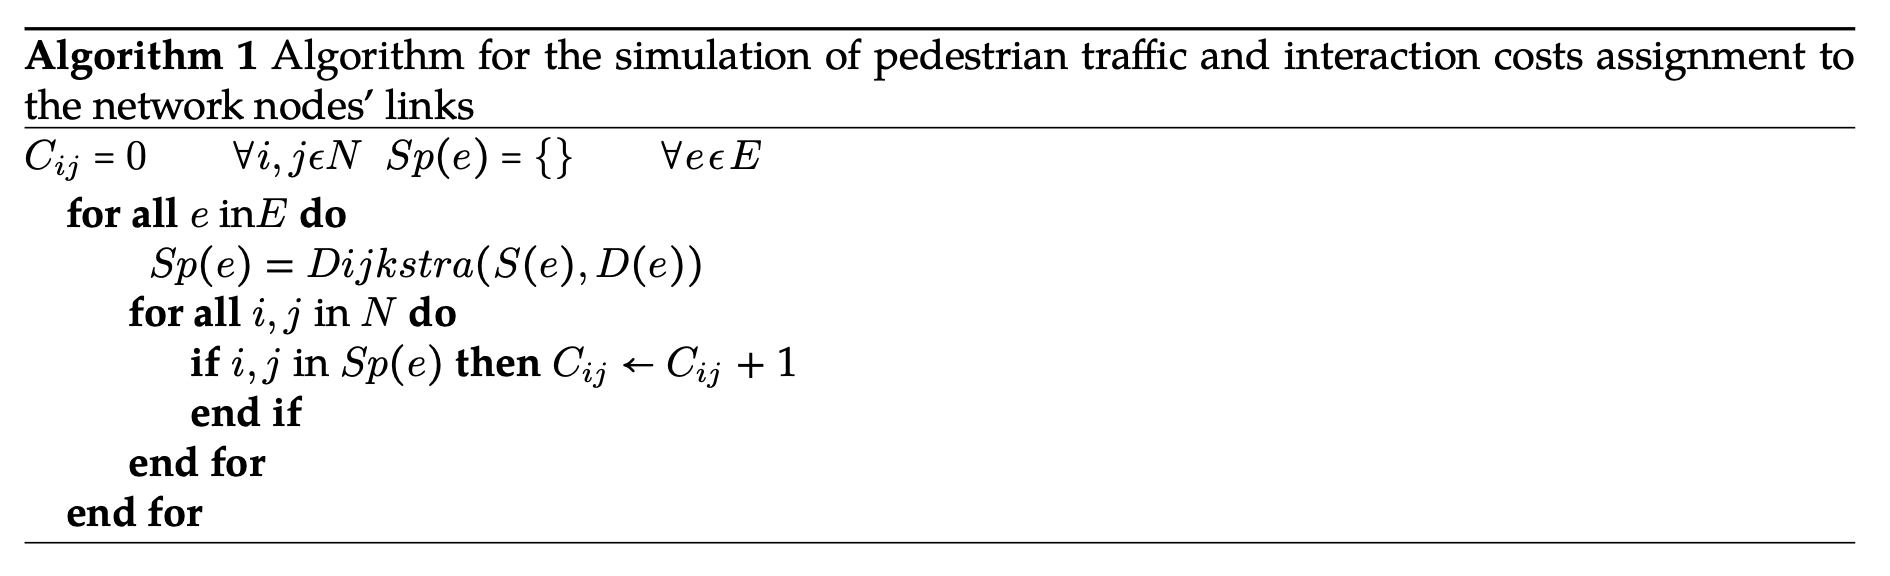 Algorithm for the simulation of pedestrian traffic and interaction costs assignment to the network nodes' links